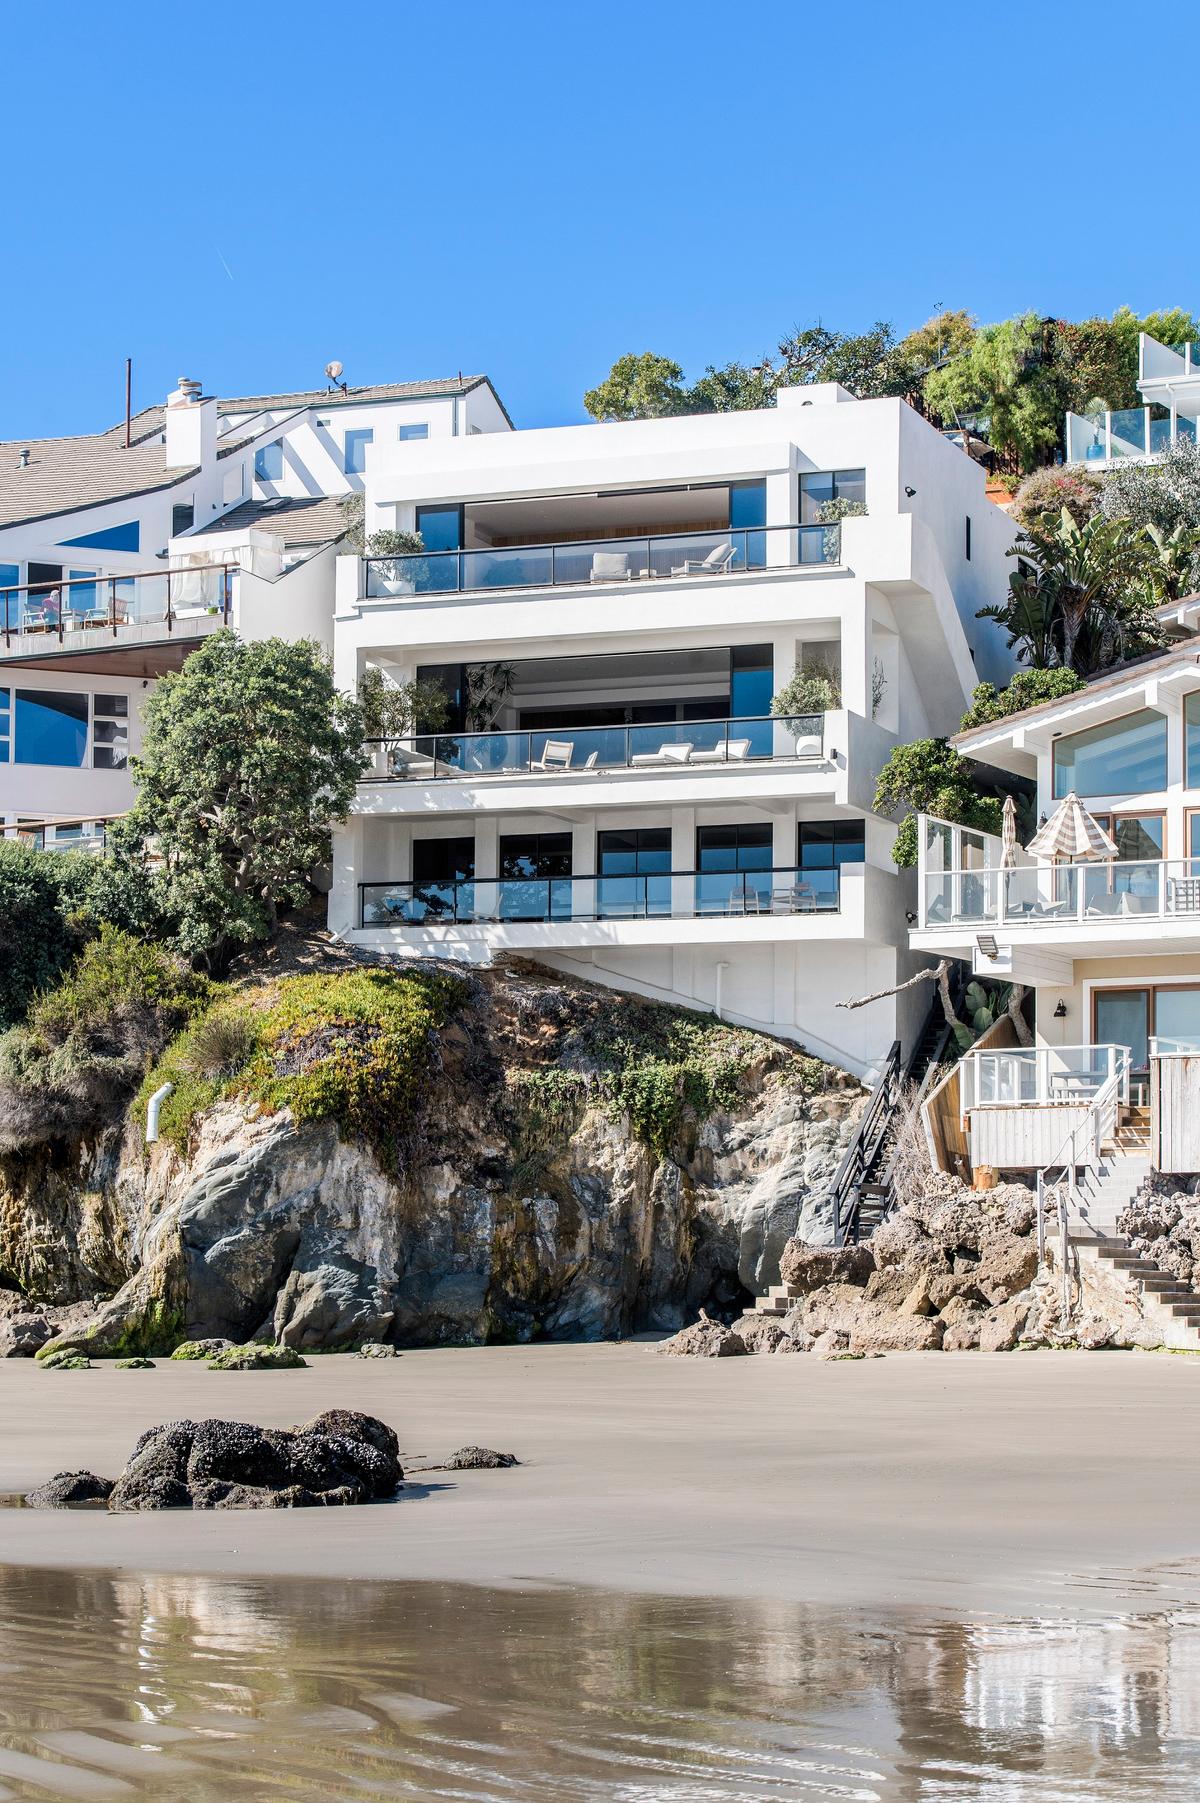 McQueen set the home high on a rocky bluff for privacy, with all three levels designed to provide unobstructed views of the beach and ocean. (The Luxury Level, Toptenrealestatedeals.com)